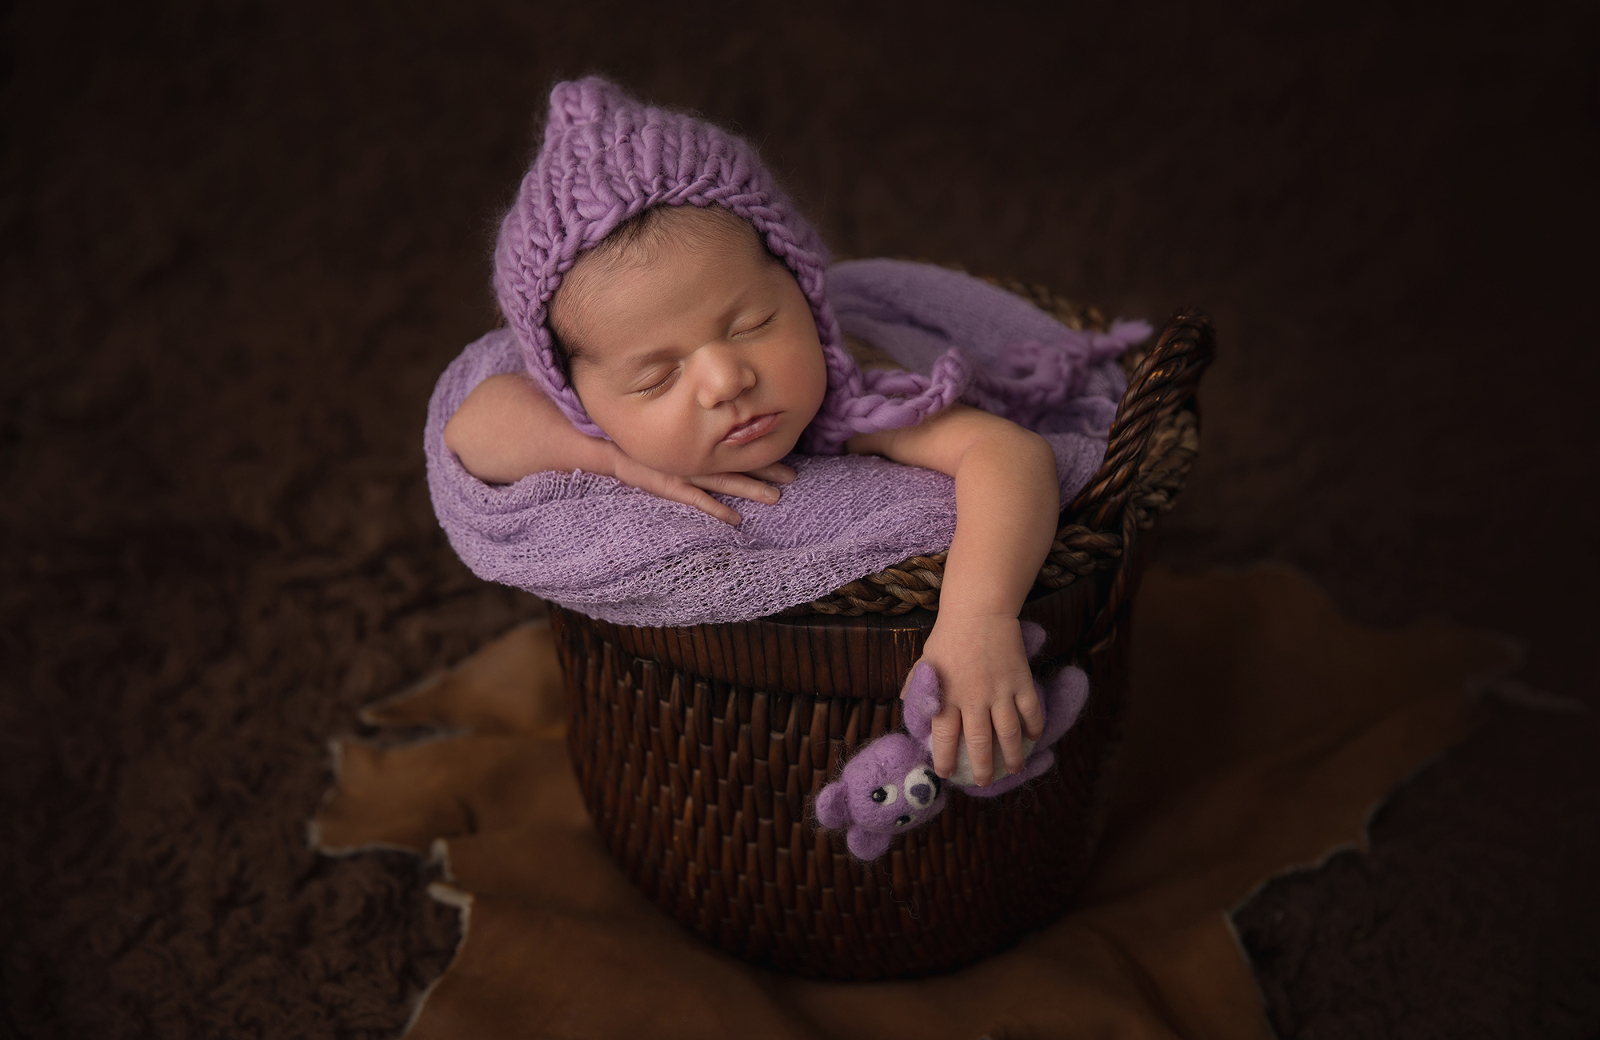 Studio newborn portrait session with dark background, featuring a shot from the side of a sleeping baby in a basket with purple blanket wearing a purple bonnet, and holding onto a small felted purple teddy bear. Image by Helga Himer Photography, Sudbury, Ontario.